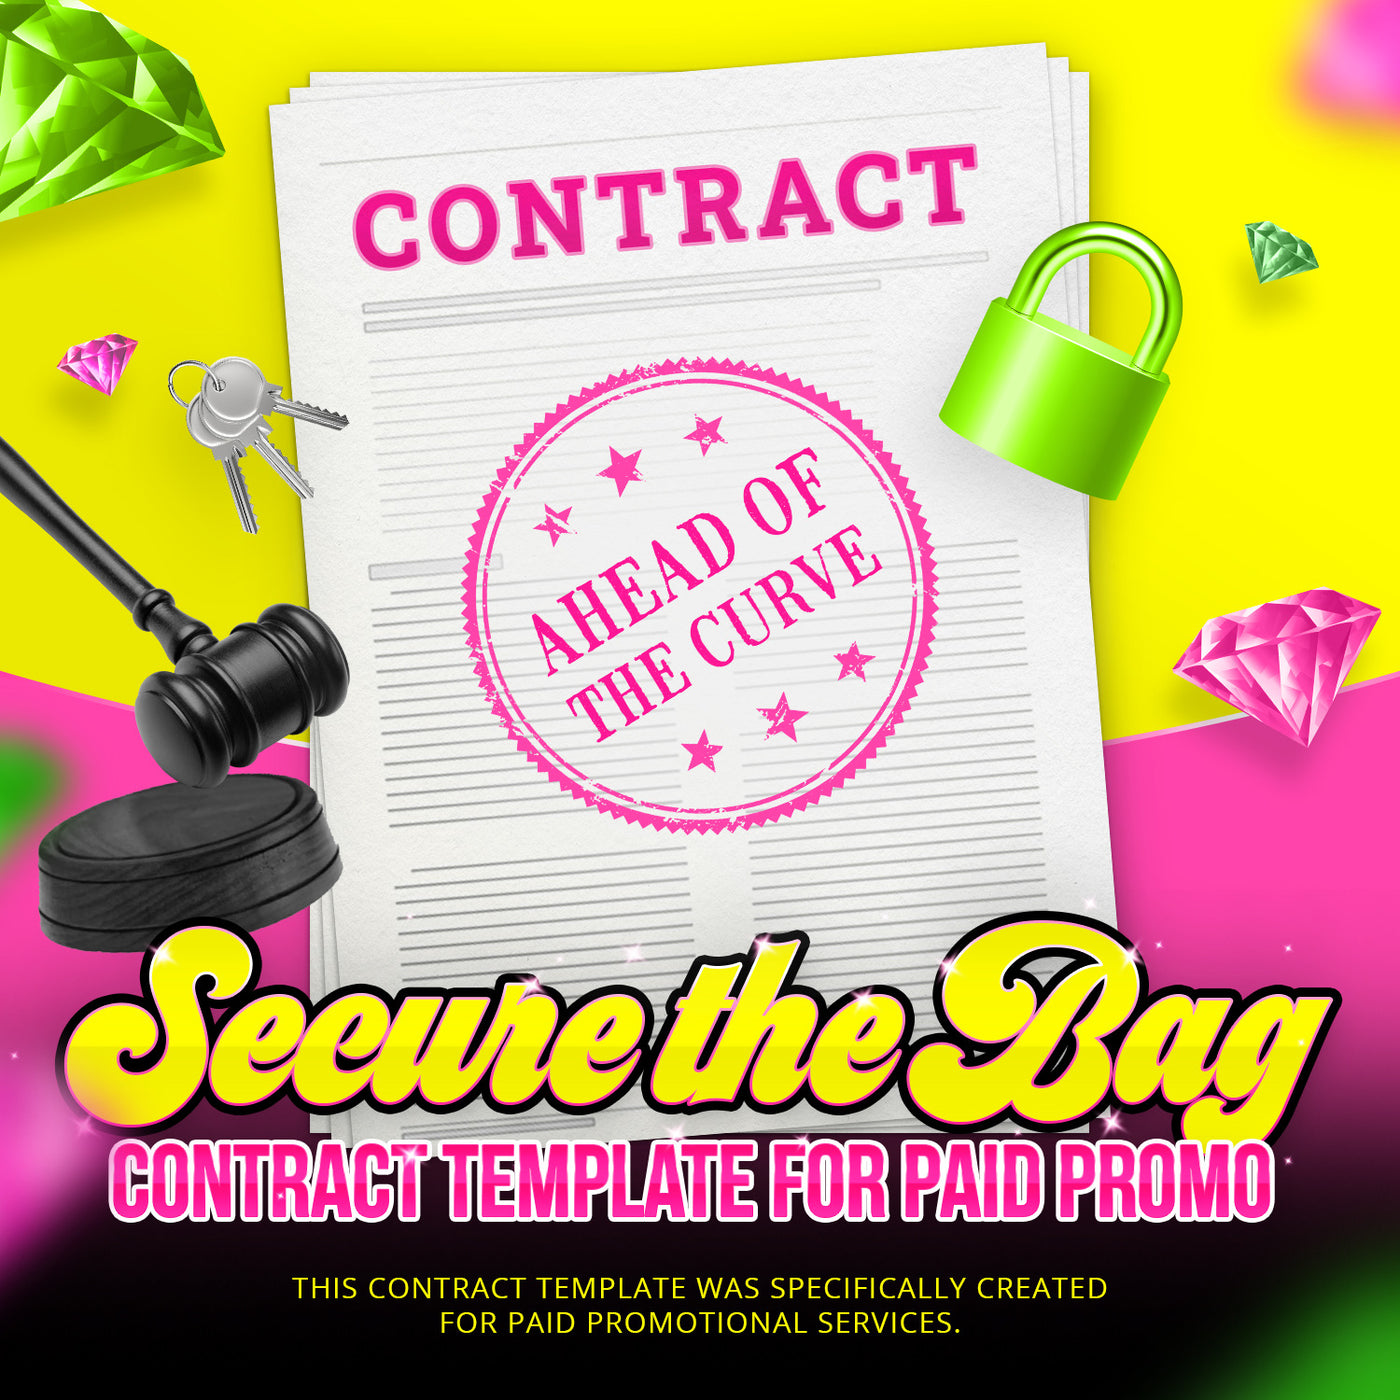 SECURE THE BAG! Contract Template For Paid Promo